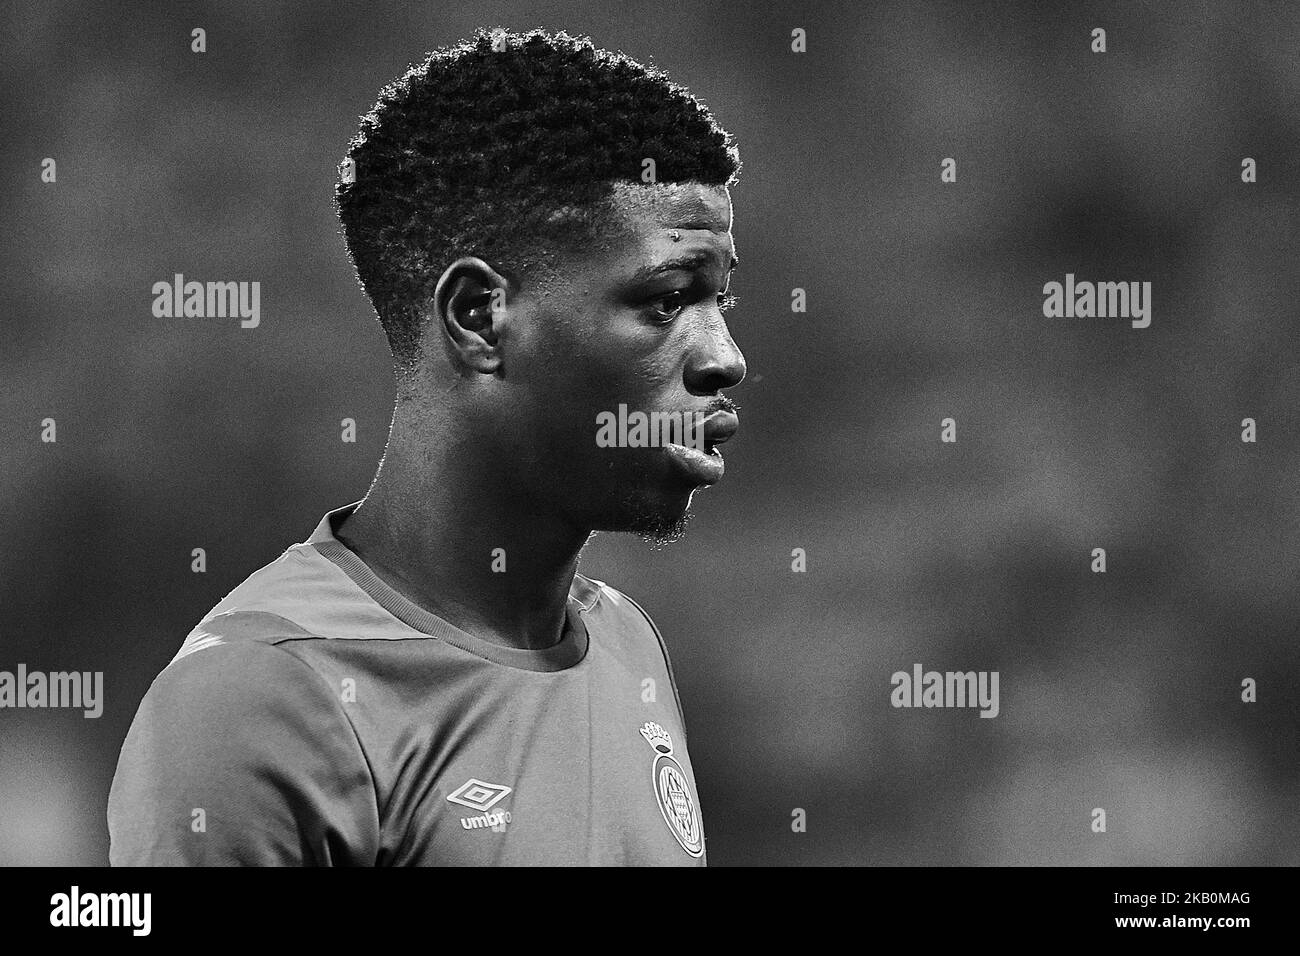 (EDITORS NOTE: the image has been converted to black and white) Kevin Soni of Girona FC looks on prior to the La Liga match between Villarreal CF and Girona FC at Estadio de la Ceramica on August 31, 2018 in Vila-real, Spain (Photo by David Aliaga/NurPhoto) Stock Photo